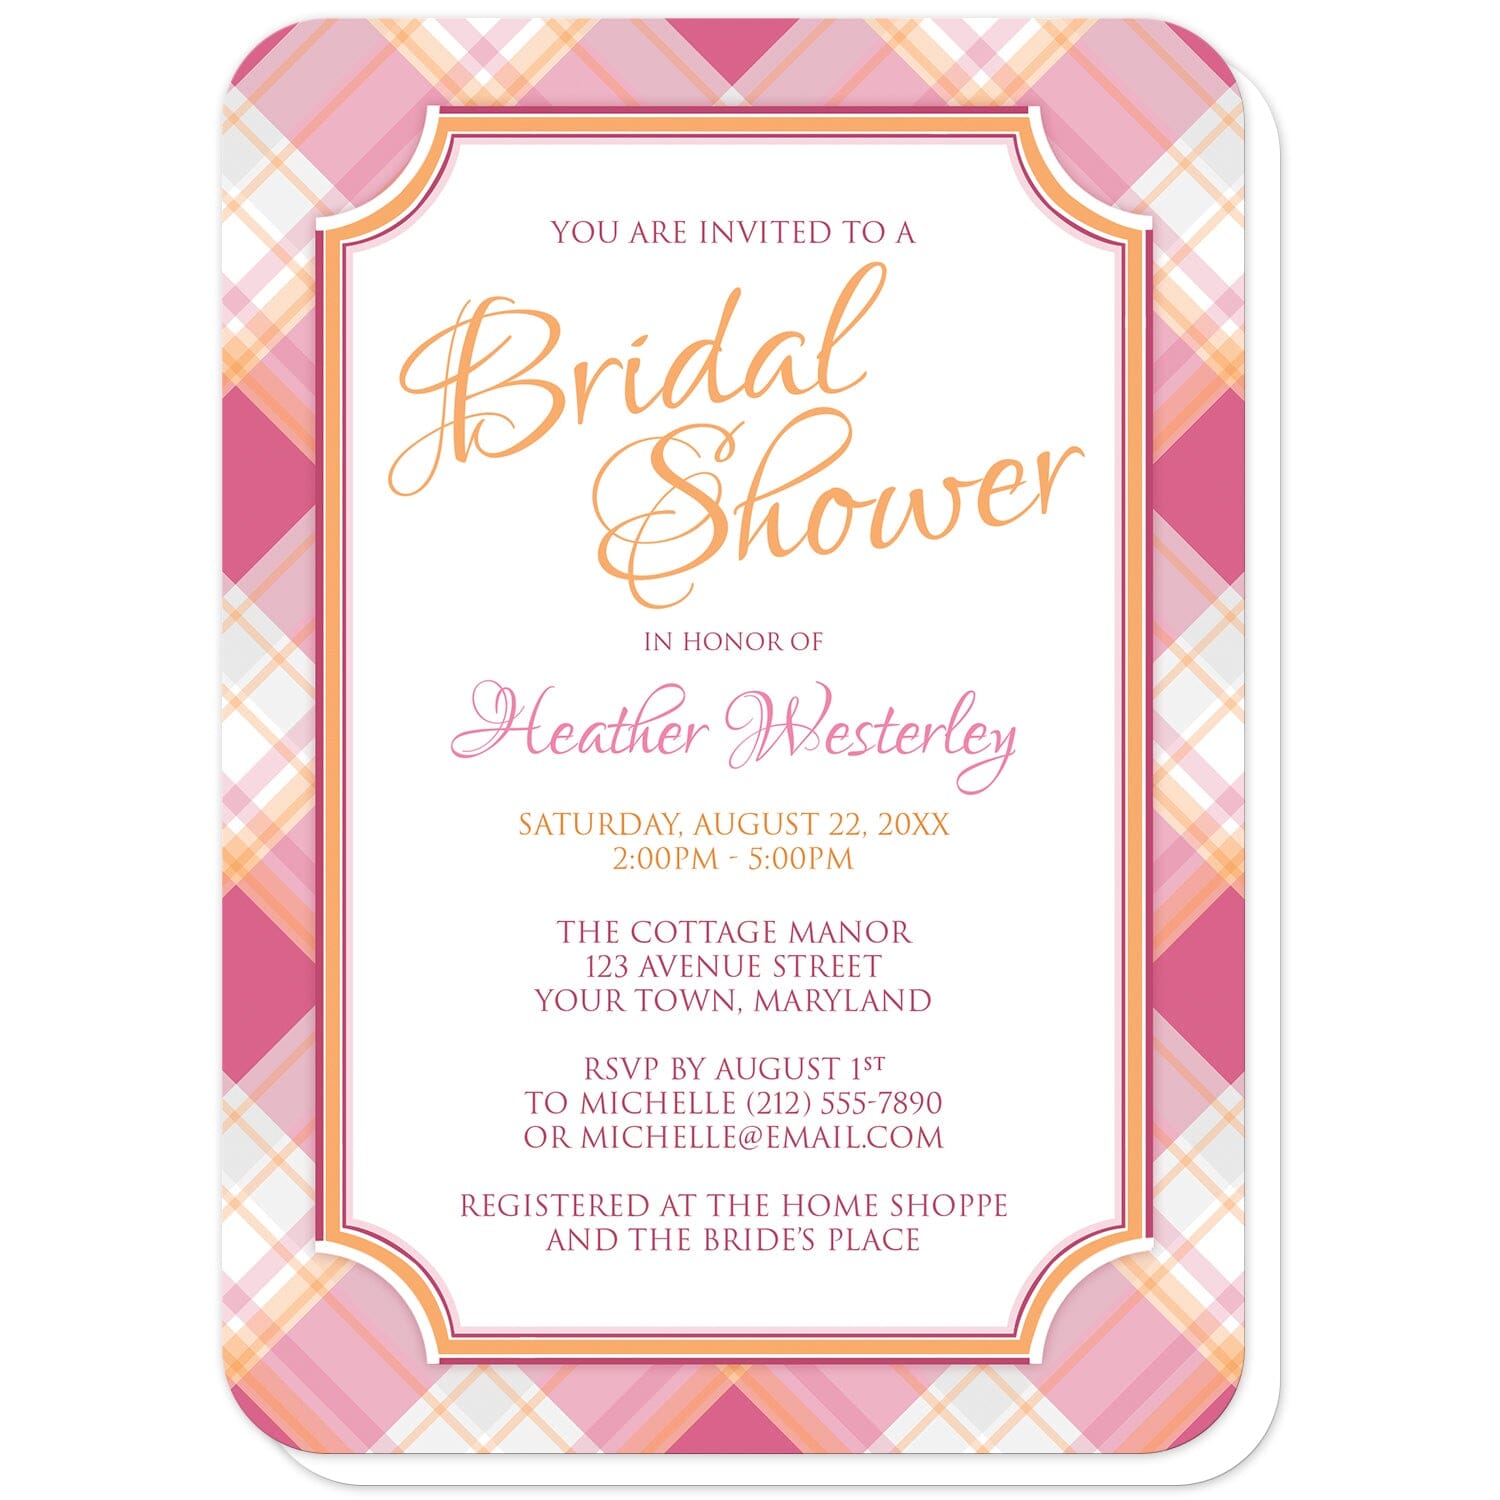 Pink and Orange Plaid Bridal Shower Invitations (with rounded corners) at Artistically Invited. Stylish summer-inspired pink and orange plaid bridal shower invitations with your personalized bridal shower celebration details custom printed in pink and orange in a white frame area, over a diagonal pink and orange plaid pattern.